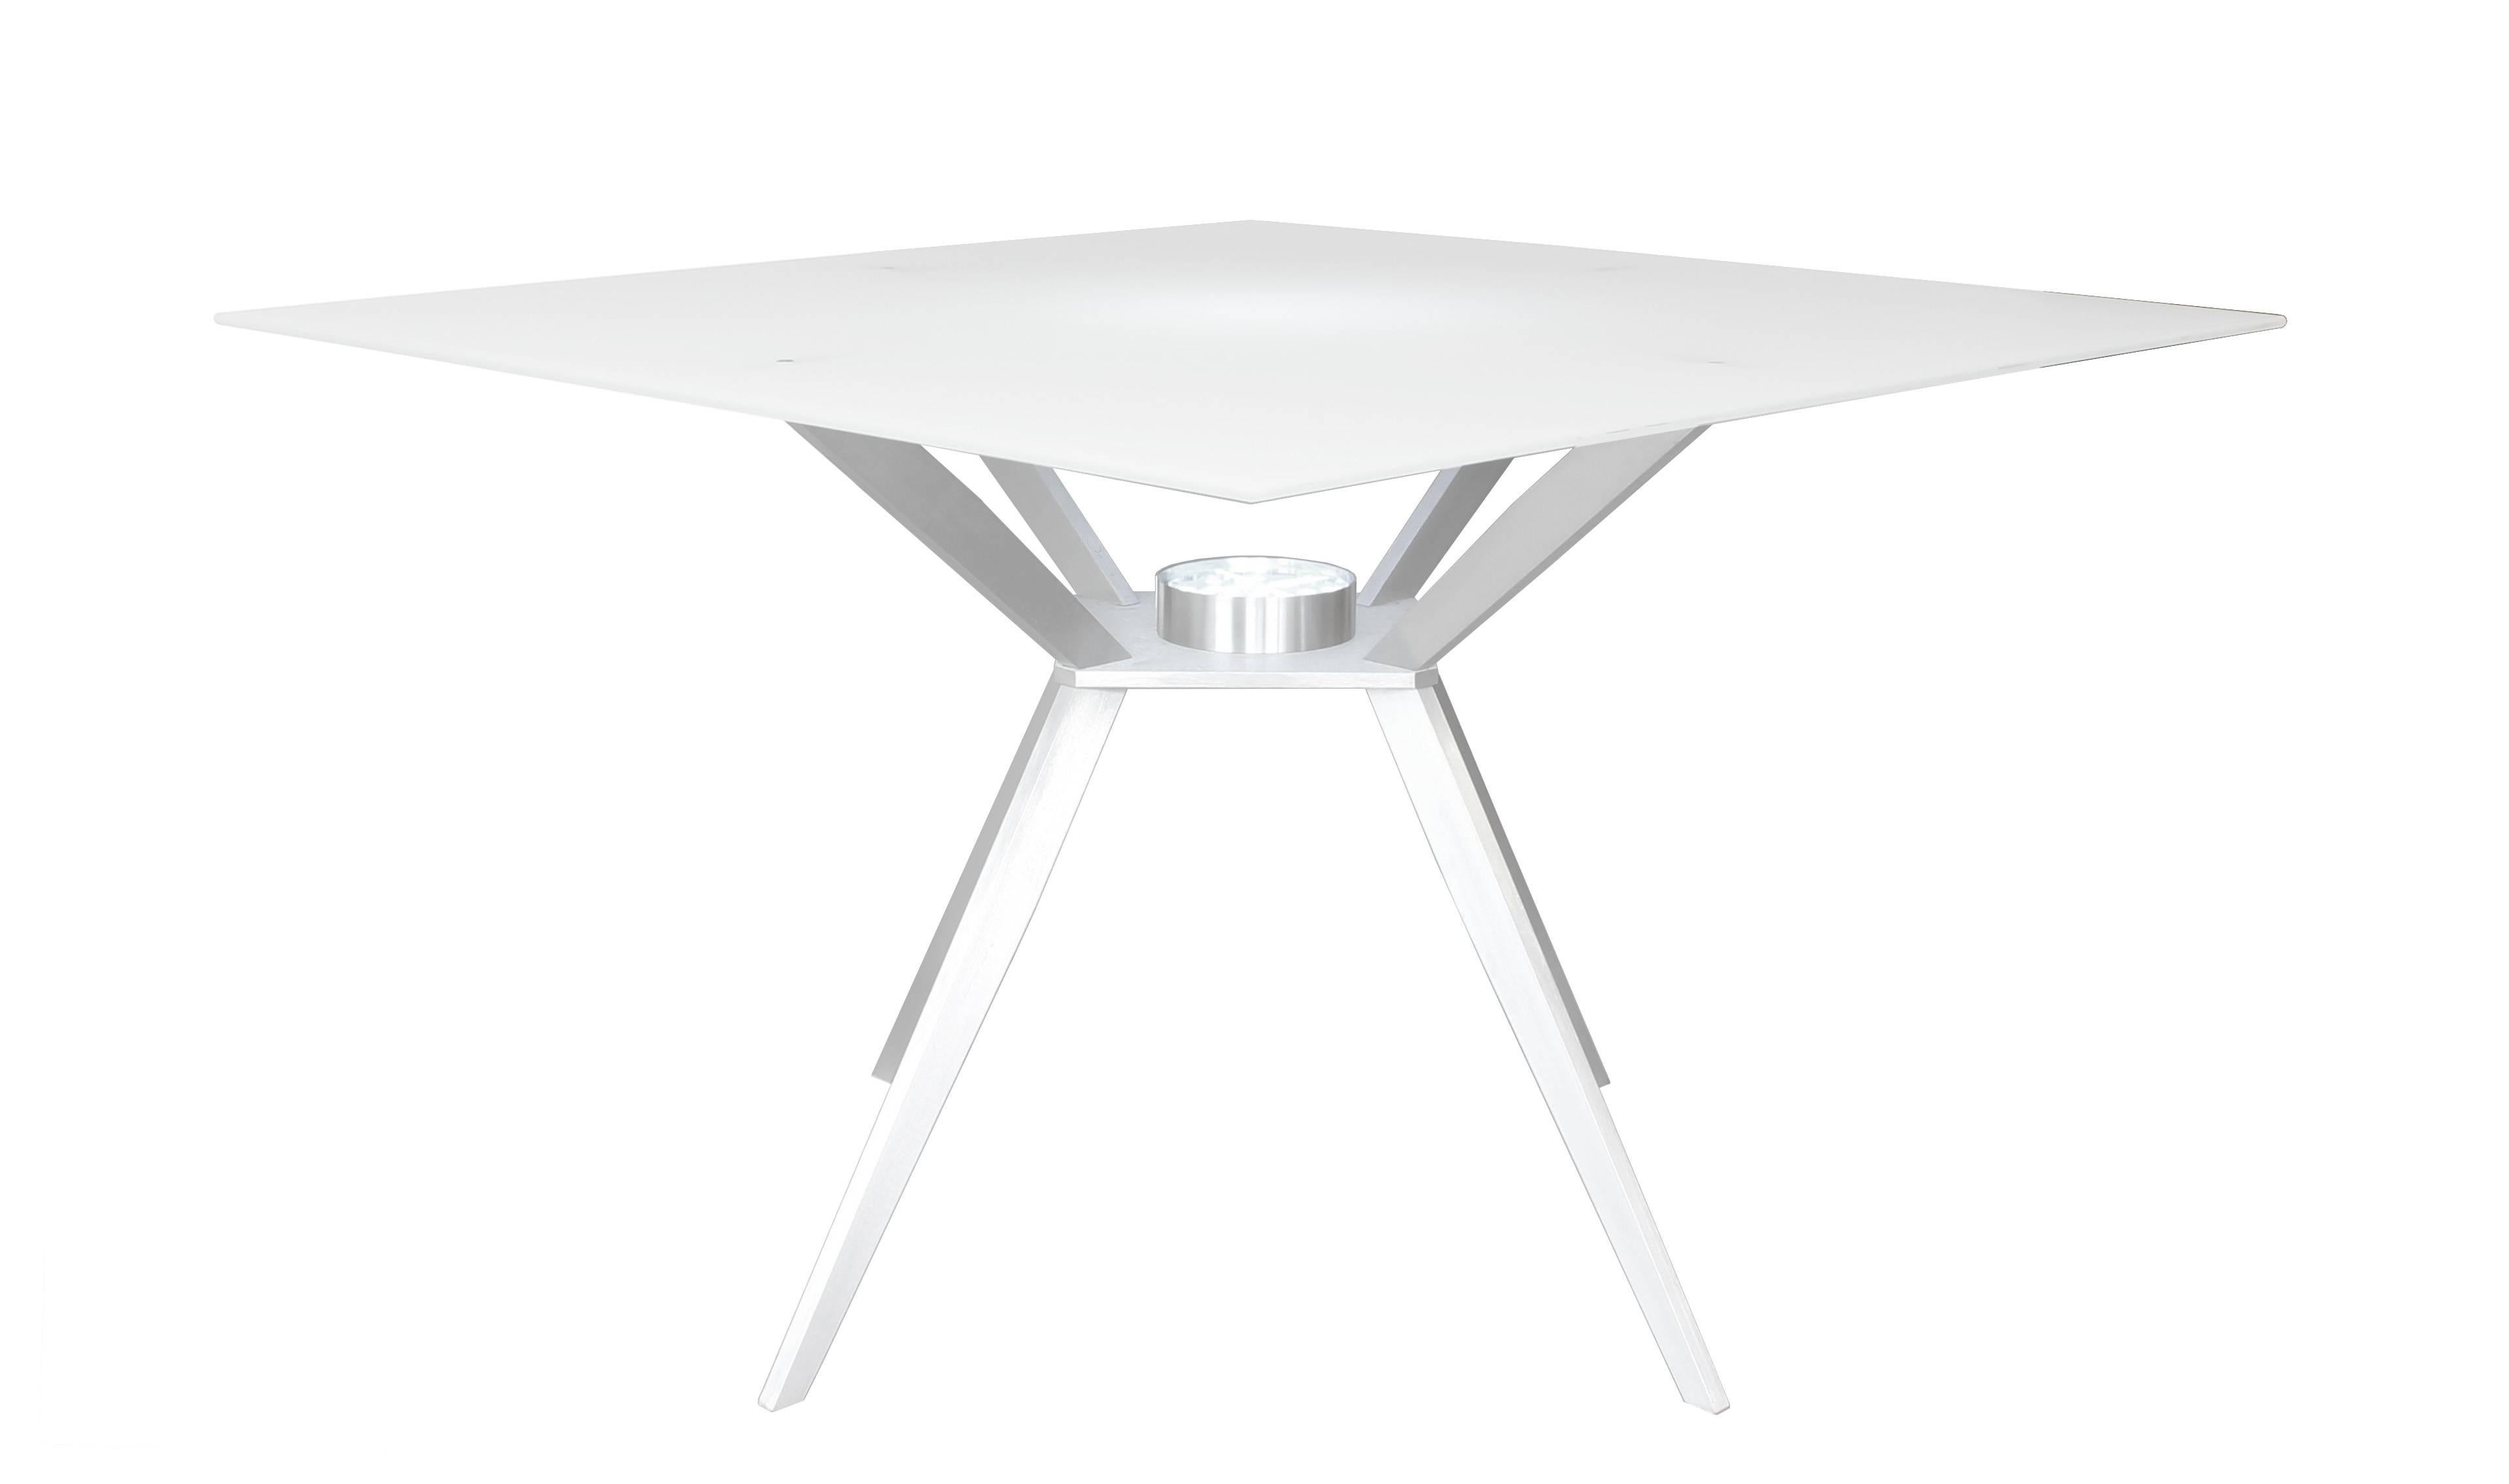 American Square Glass Satin Aluminium Table and Pendant Mid-Century Modern Inspired For Sale